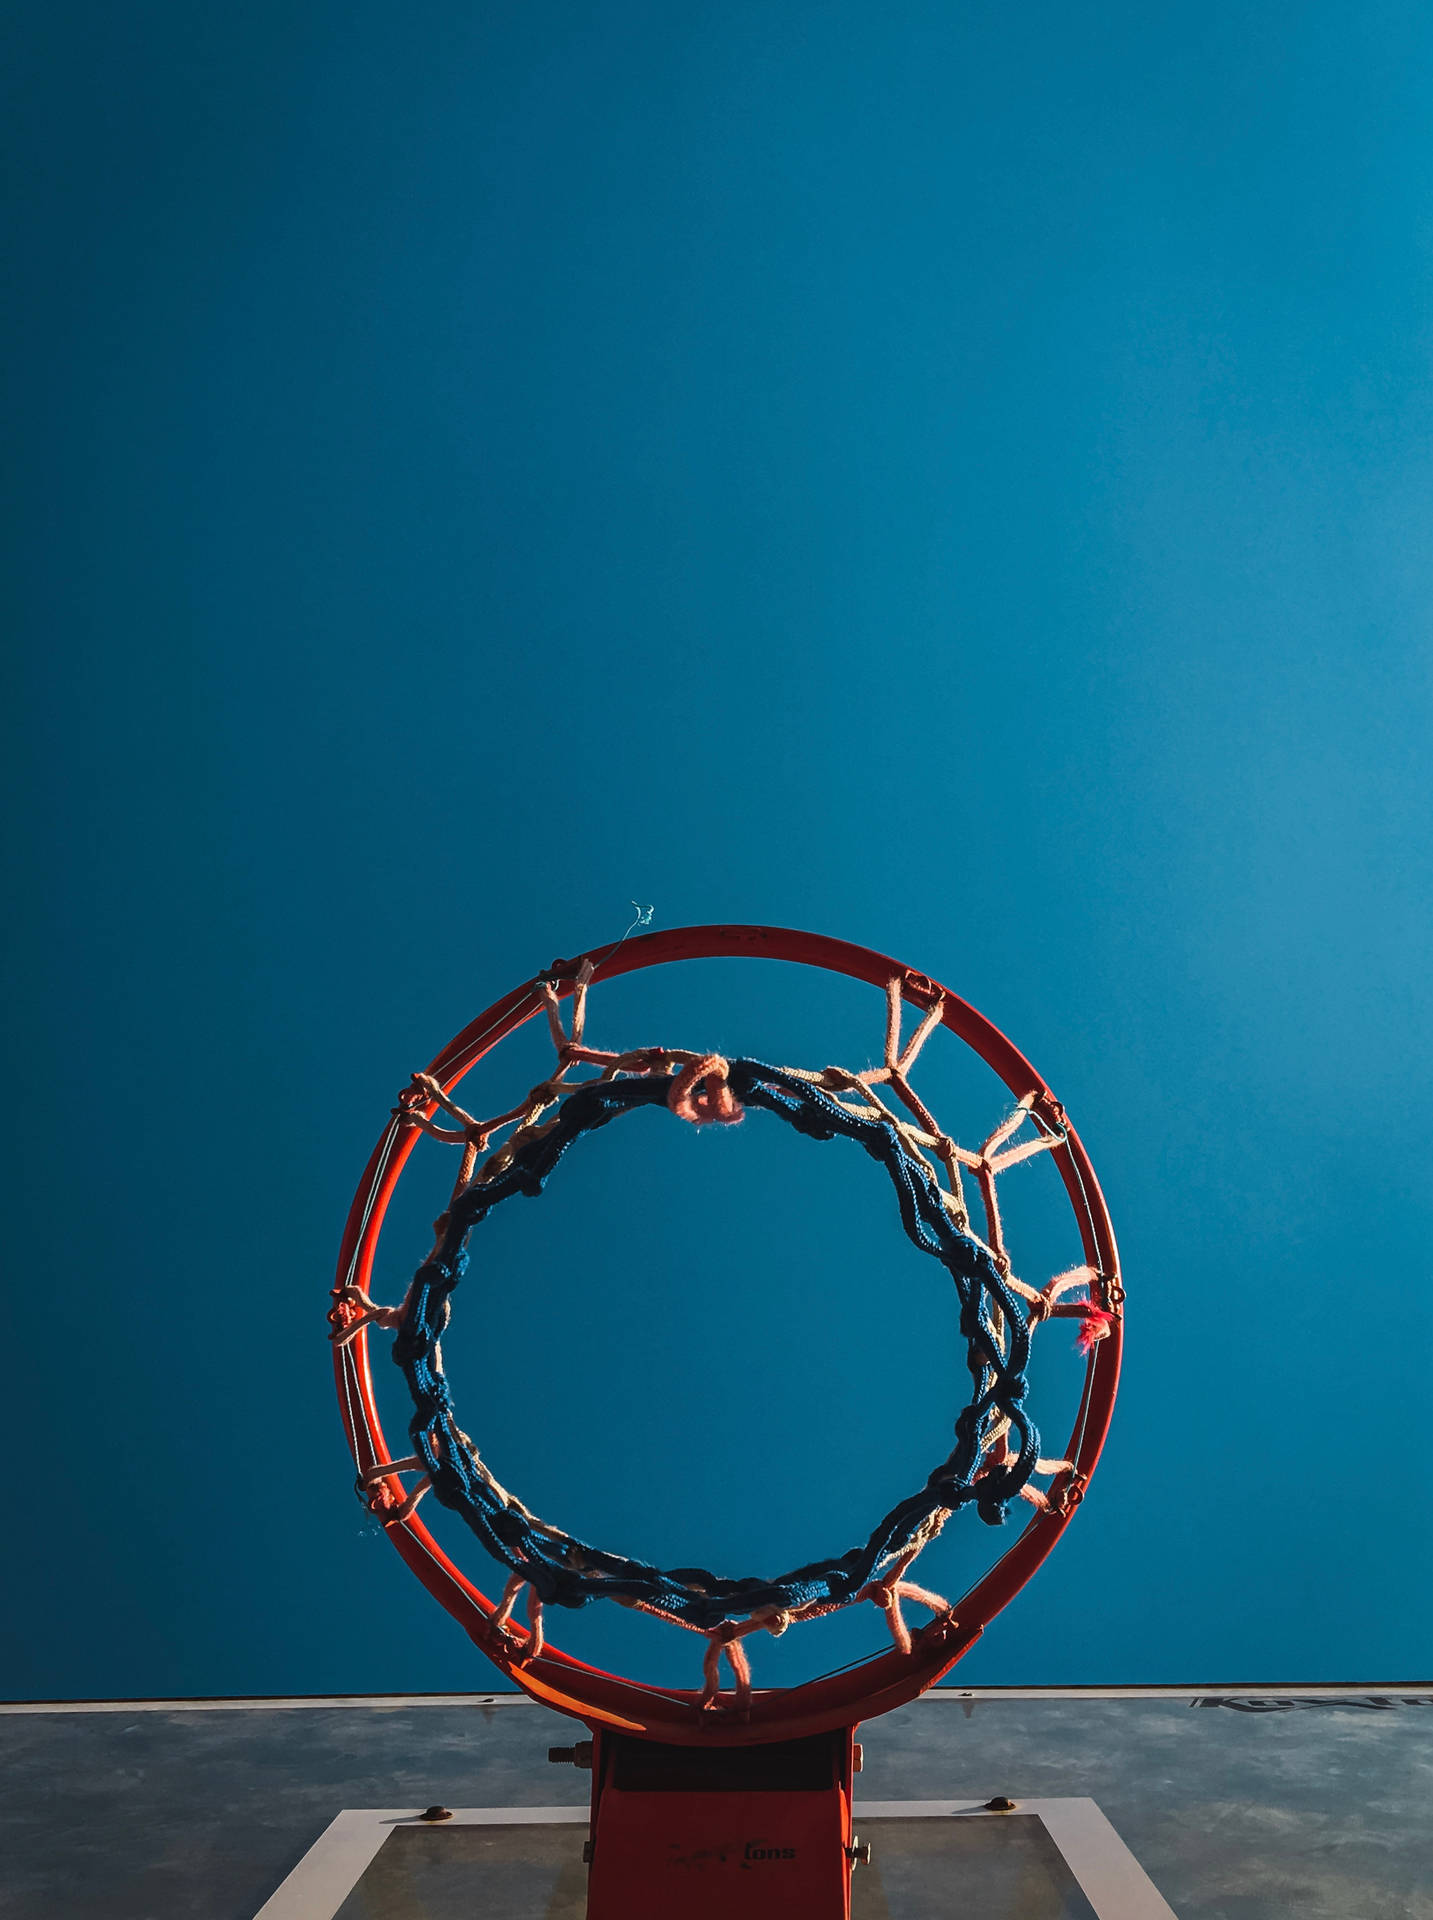 Hd Basketball Ring Background